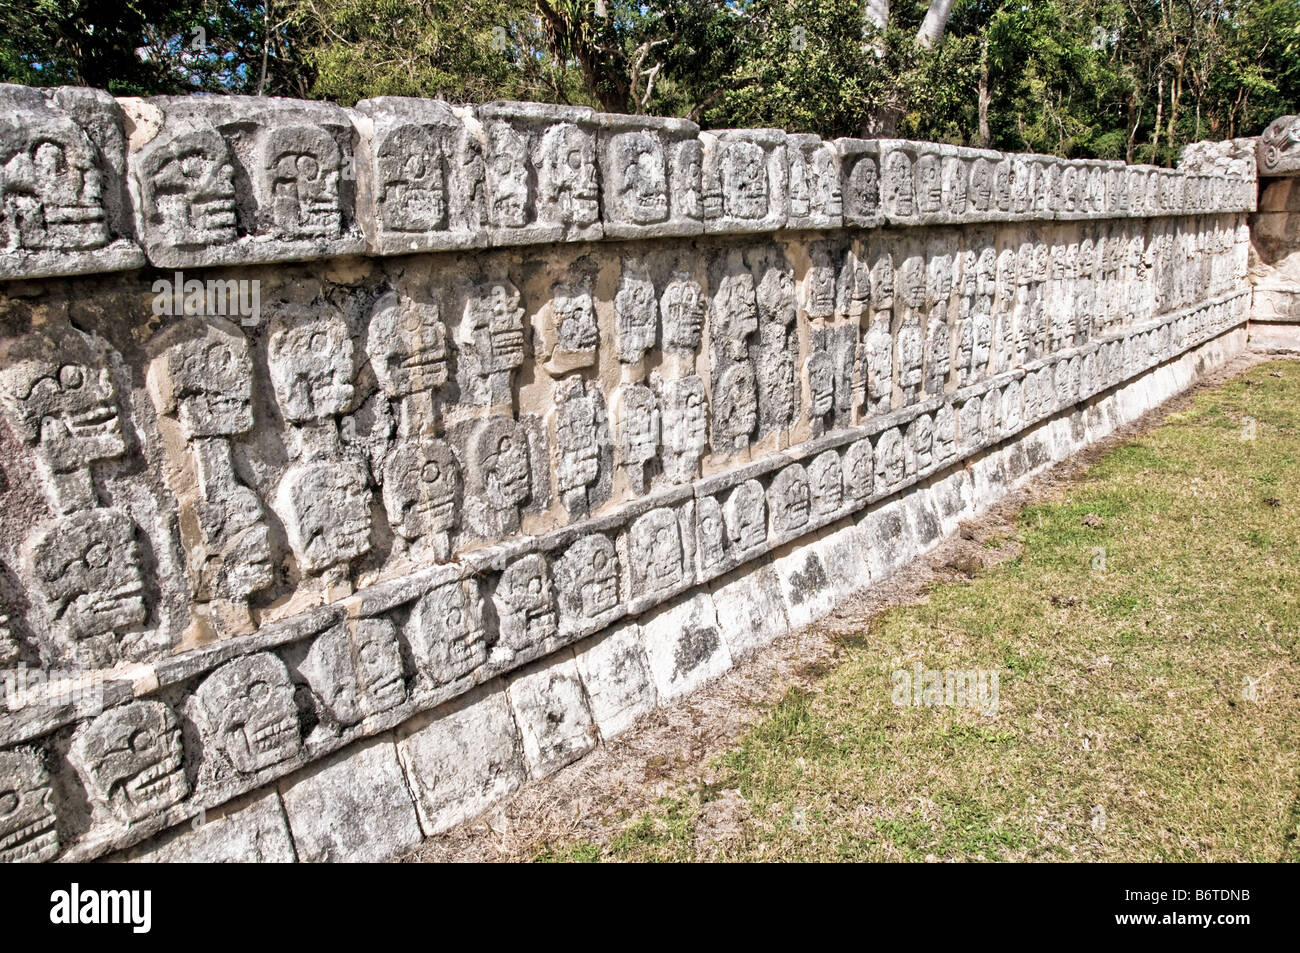 CHICHEN ITZA, Mexico - A low wall with intricately carved stone skulls at the ancient Mayan ruins at Chichen Itza, Yucatan, Mexico. Chichen Itza, located on the Yucatan Peninsula in Mexico, is a significant archaeological site showcasing the rich history and advanced scientific knowledge of the ancient Mayan civilization. It's most known for the Kukulkan Pyramid, or 'El Castillo,' a four-sided structure with 91 steps on each side, culminating in a single step at the top to represent the 365 days of the solar year. Stock Photo